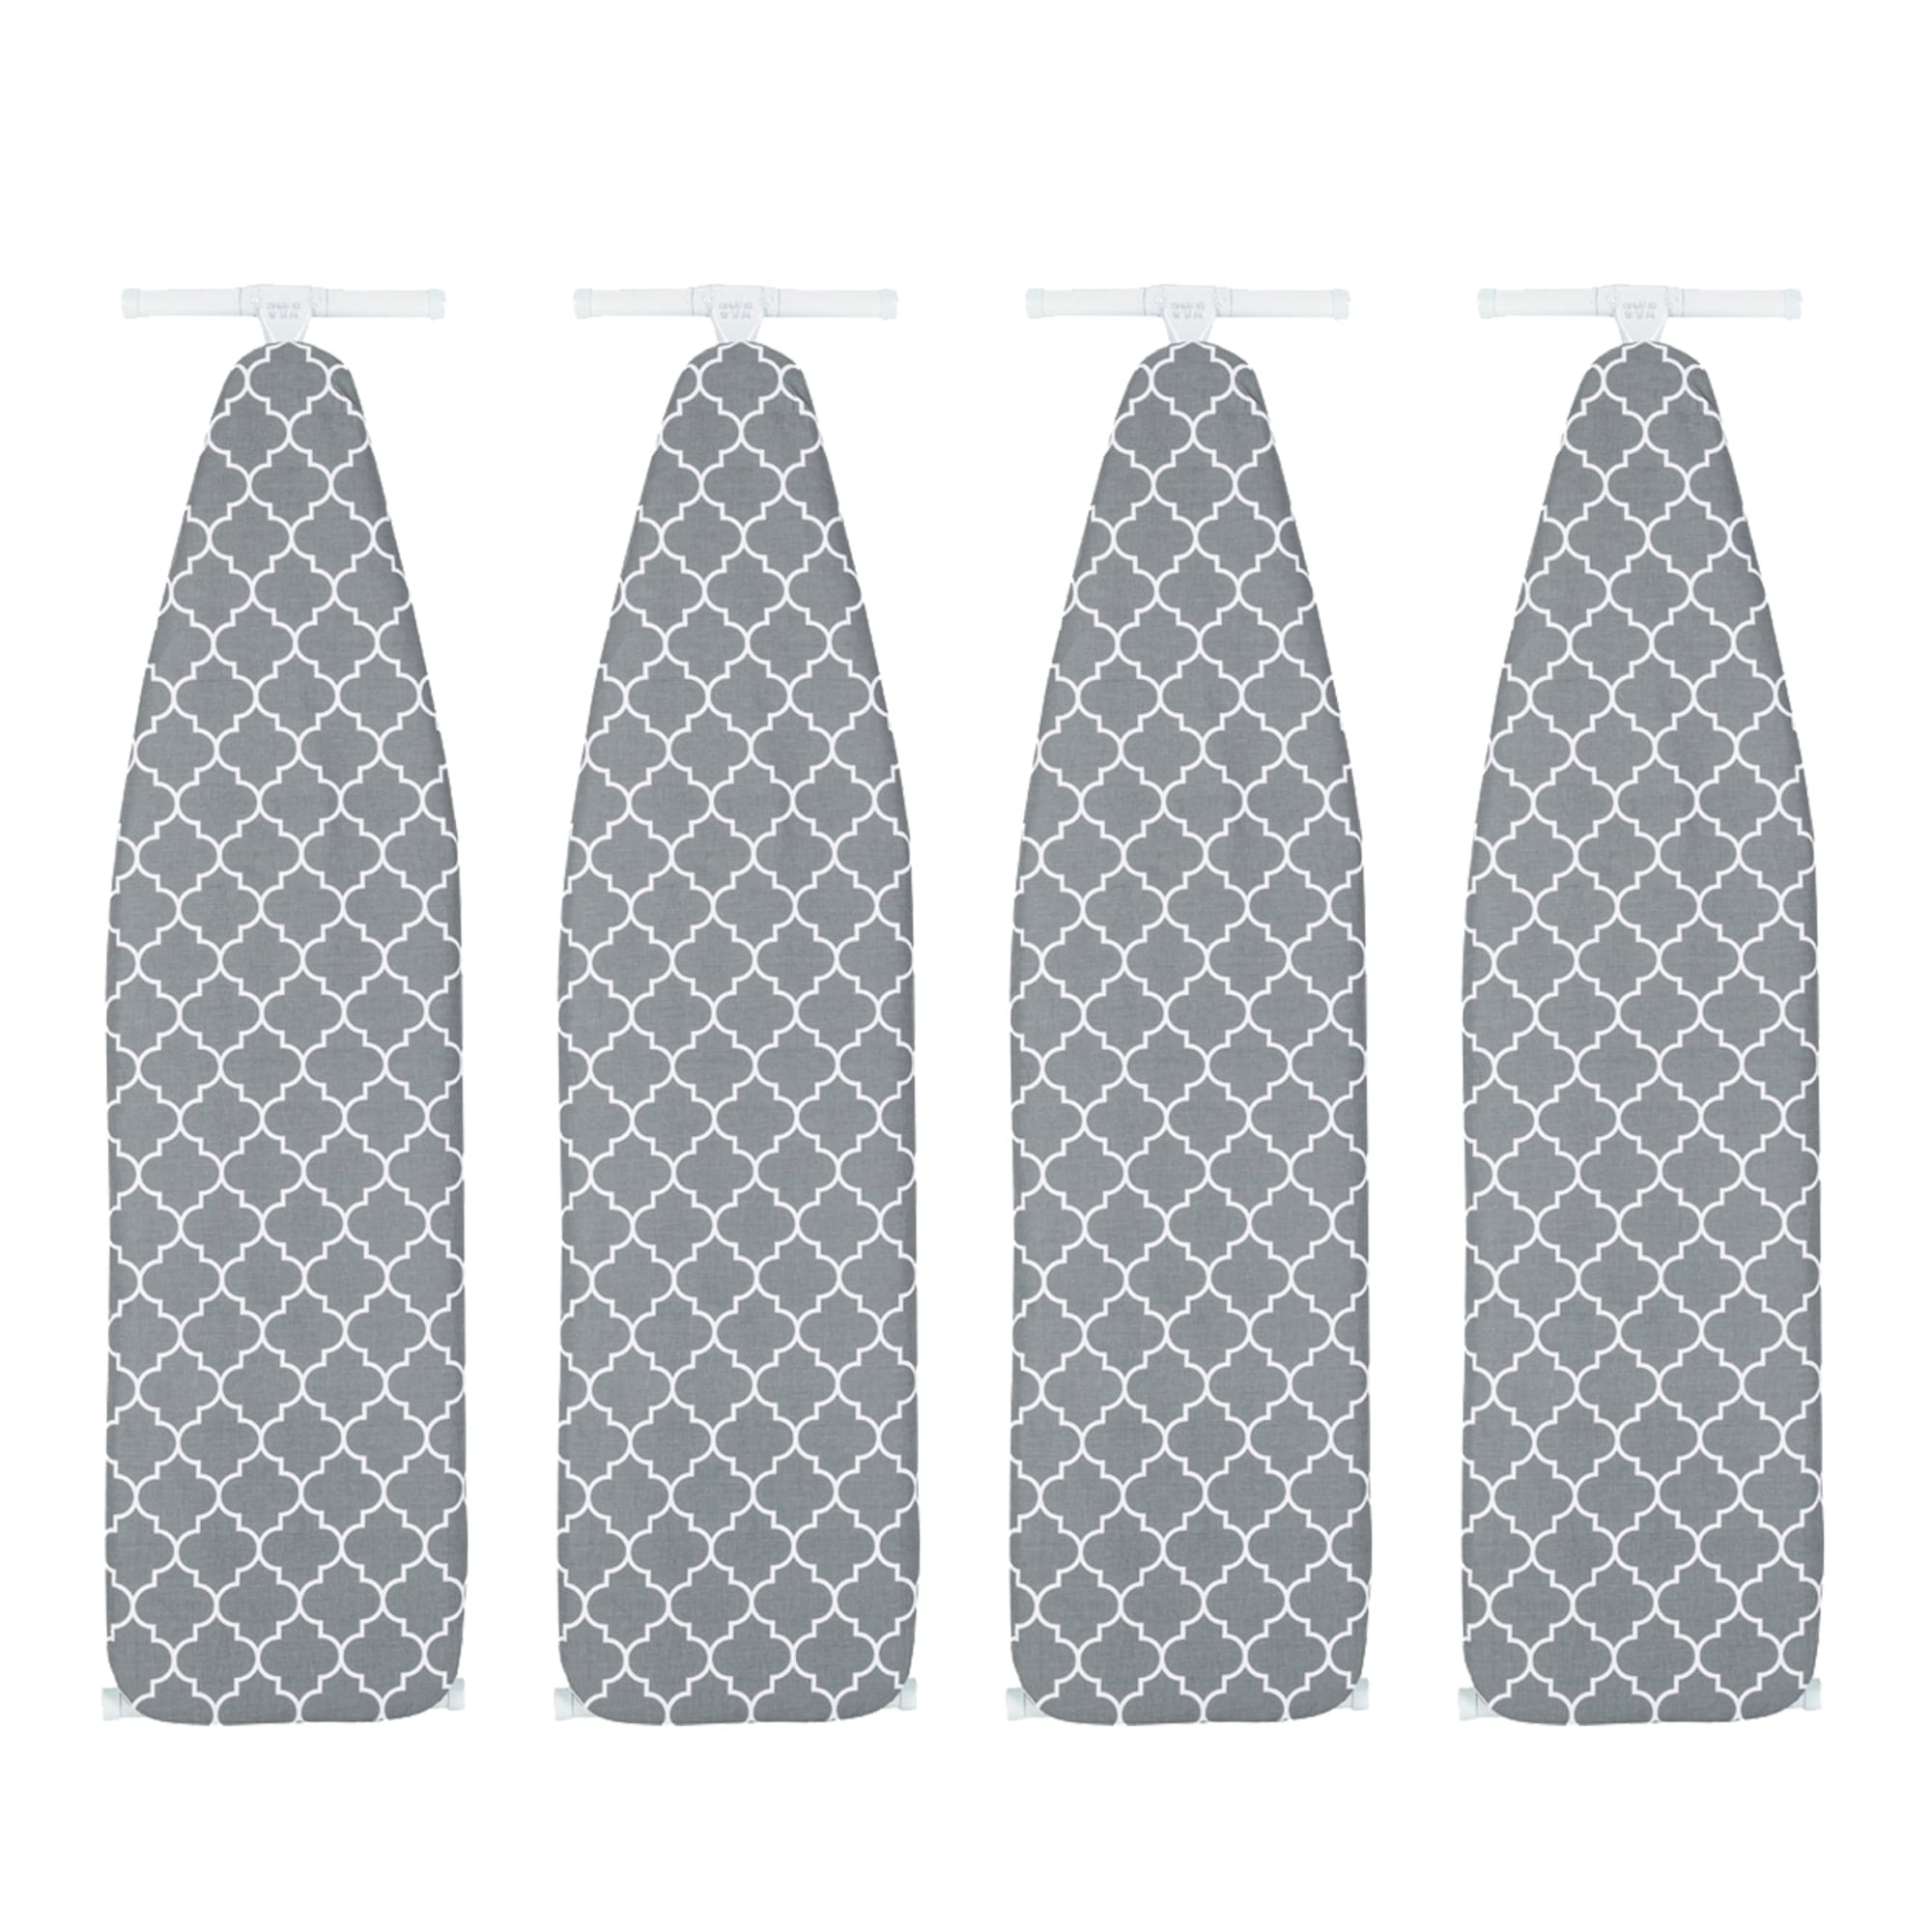 Seymour Home Products Adjustable Height, T-Leg Ironing Board With Perforated Top, Gray Lattice (4 Pack) $25.00 EACH, CASE PACK OF 4